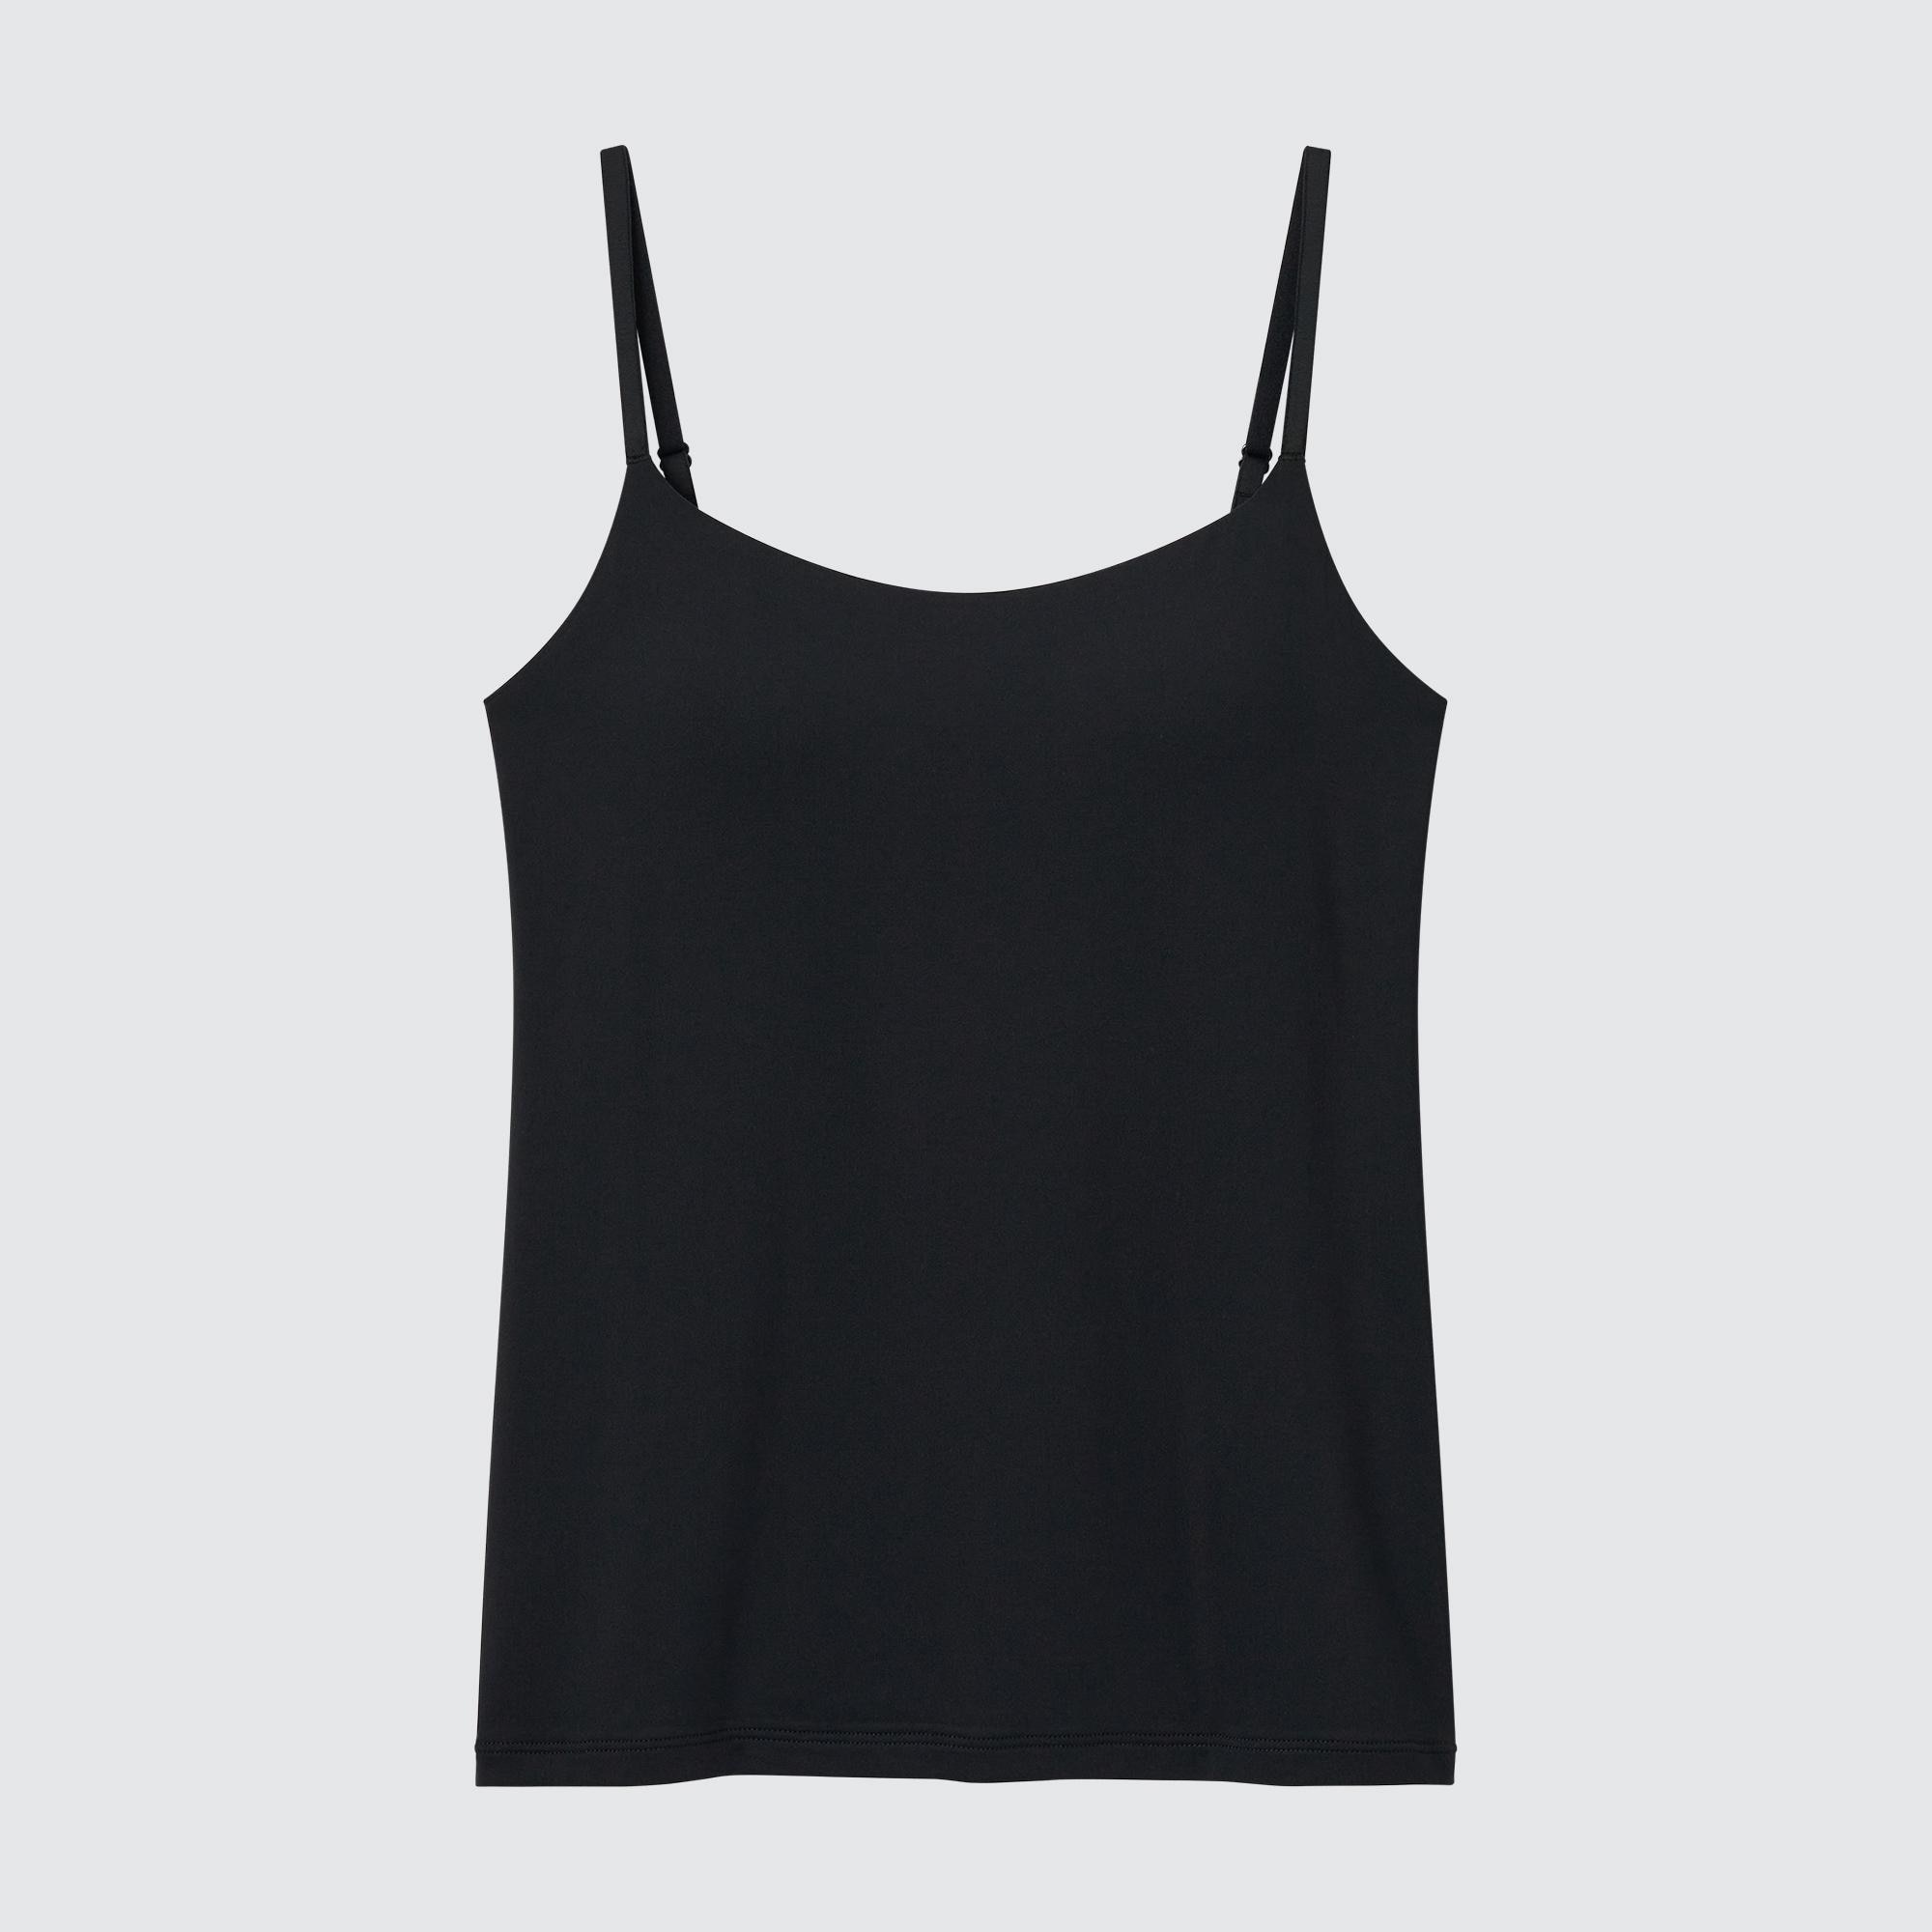 Uniqlo Airism Camisoles: The next best thing to going naked